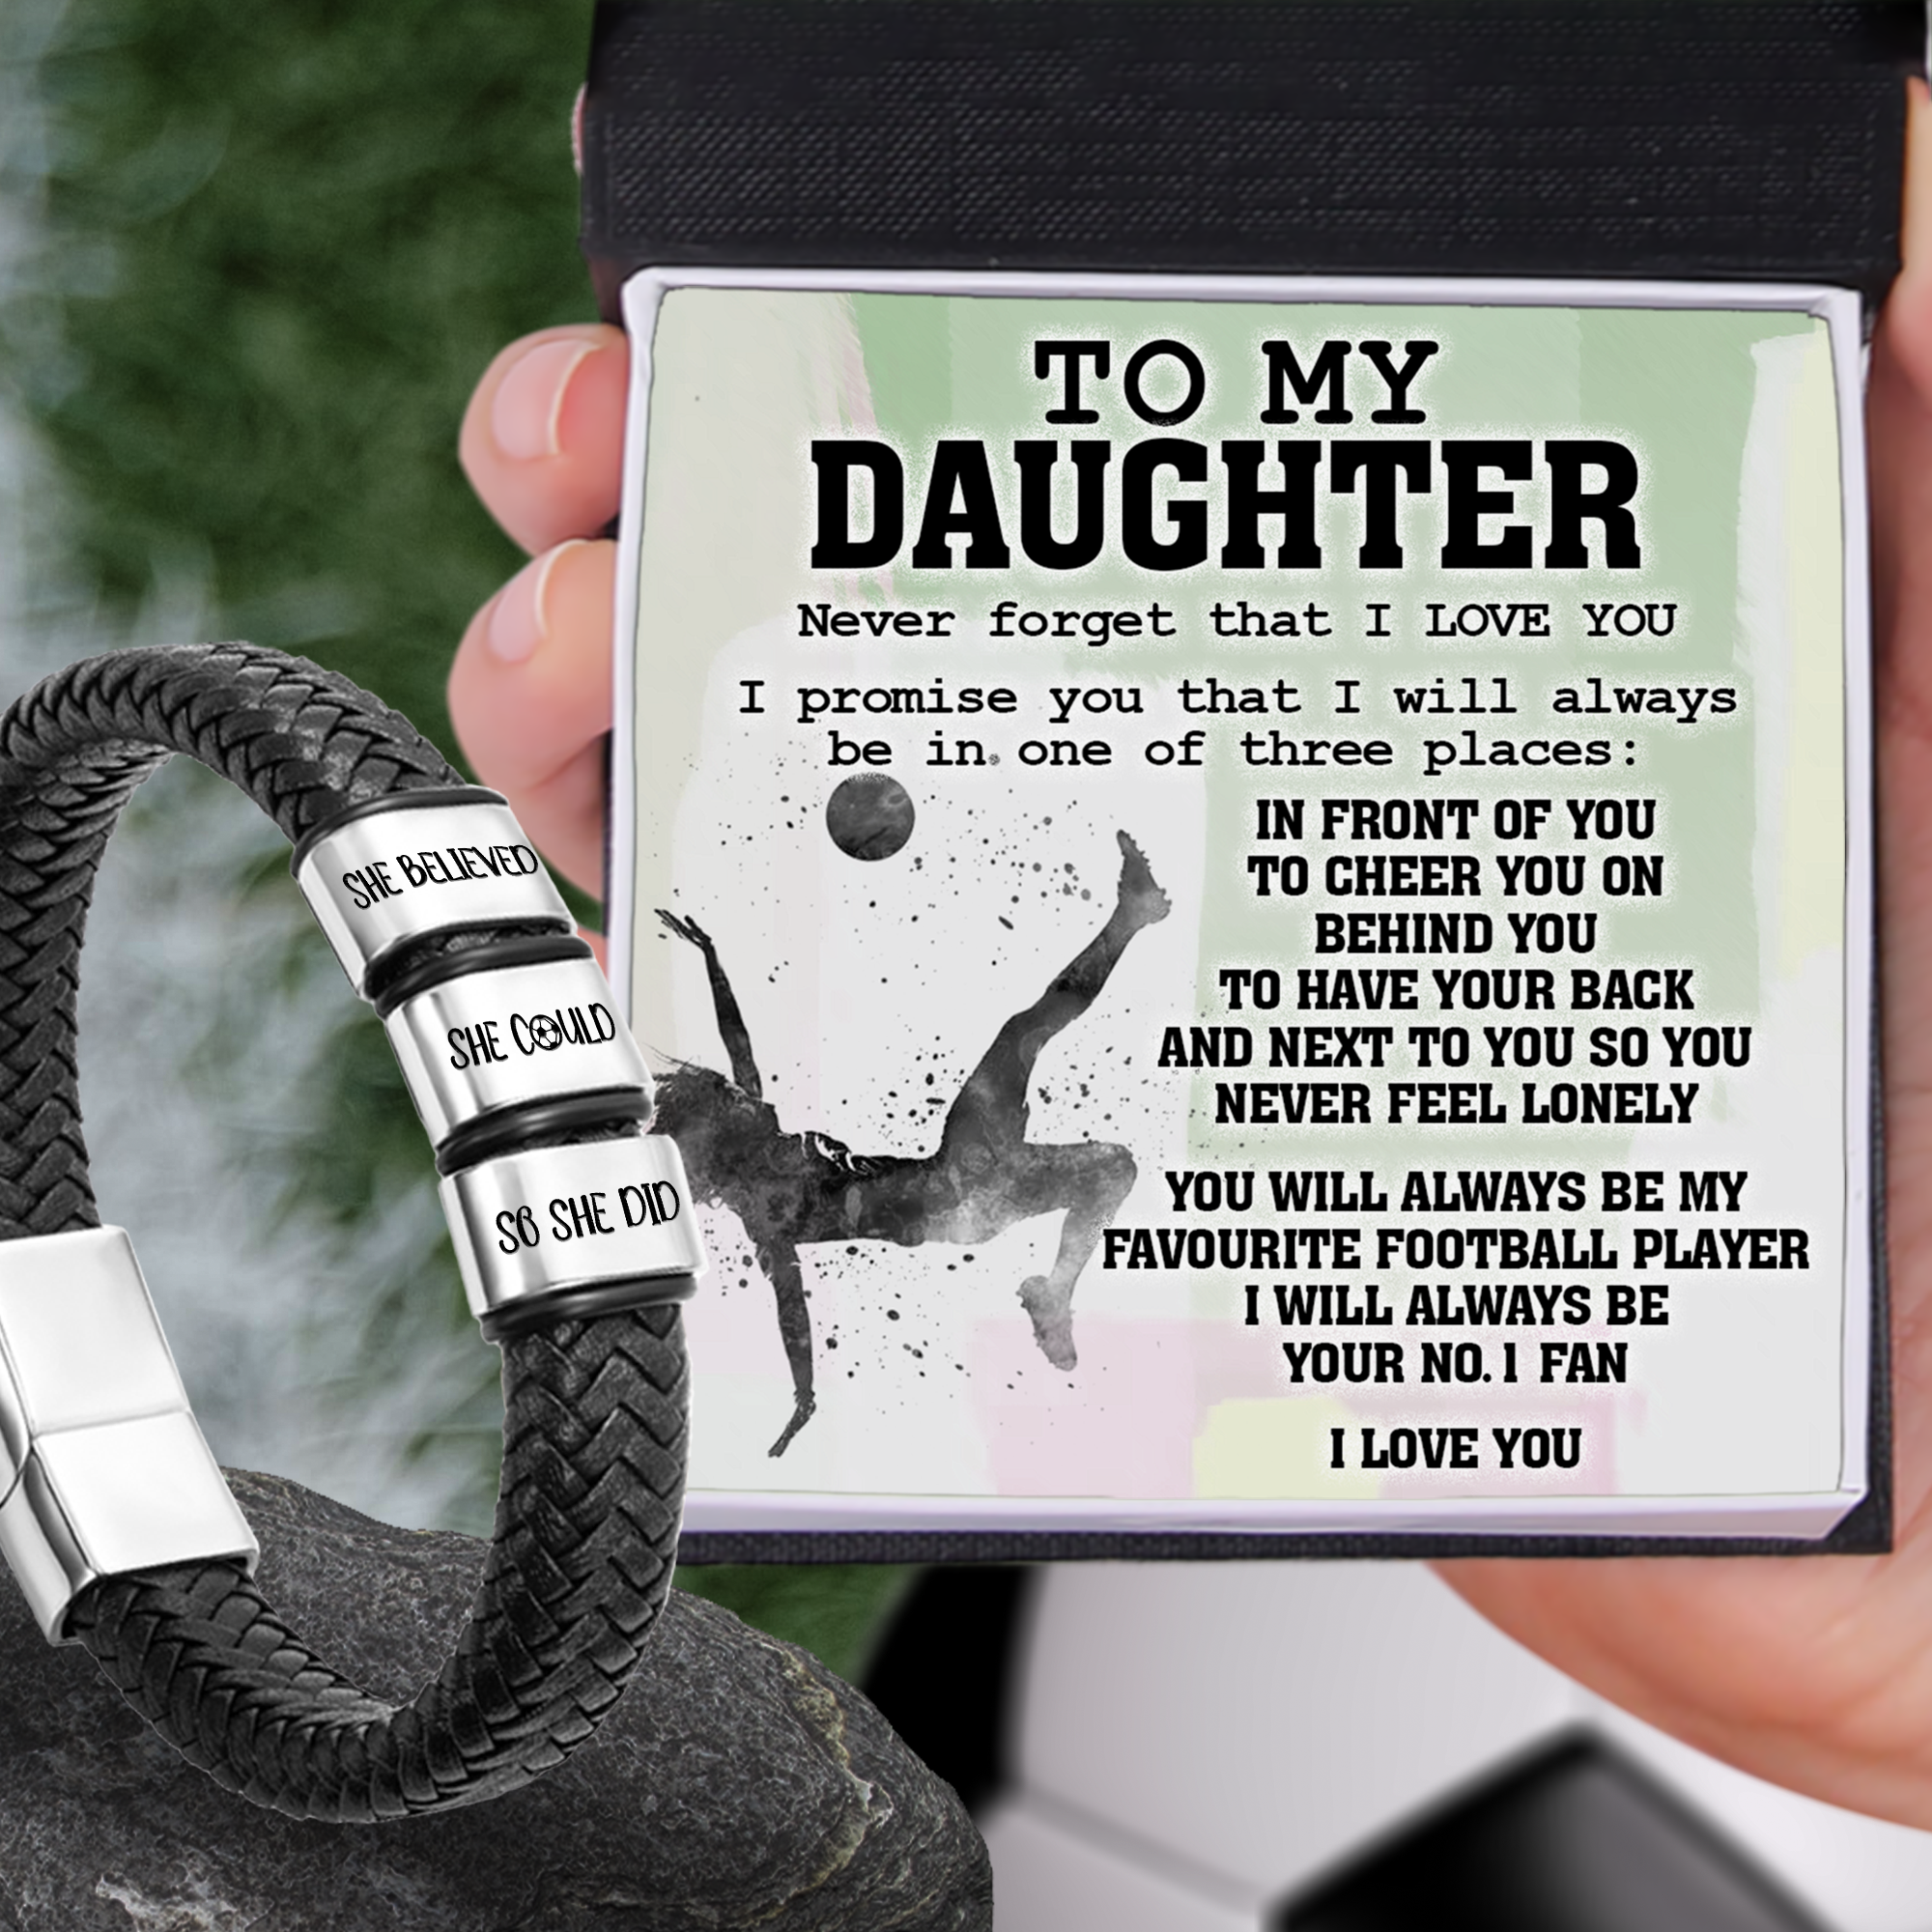 Leather Bracelet - Football - To My Daughter - Never Forget That I Love You - Ukgbzl17001